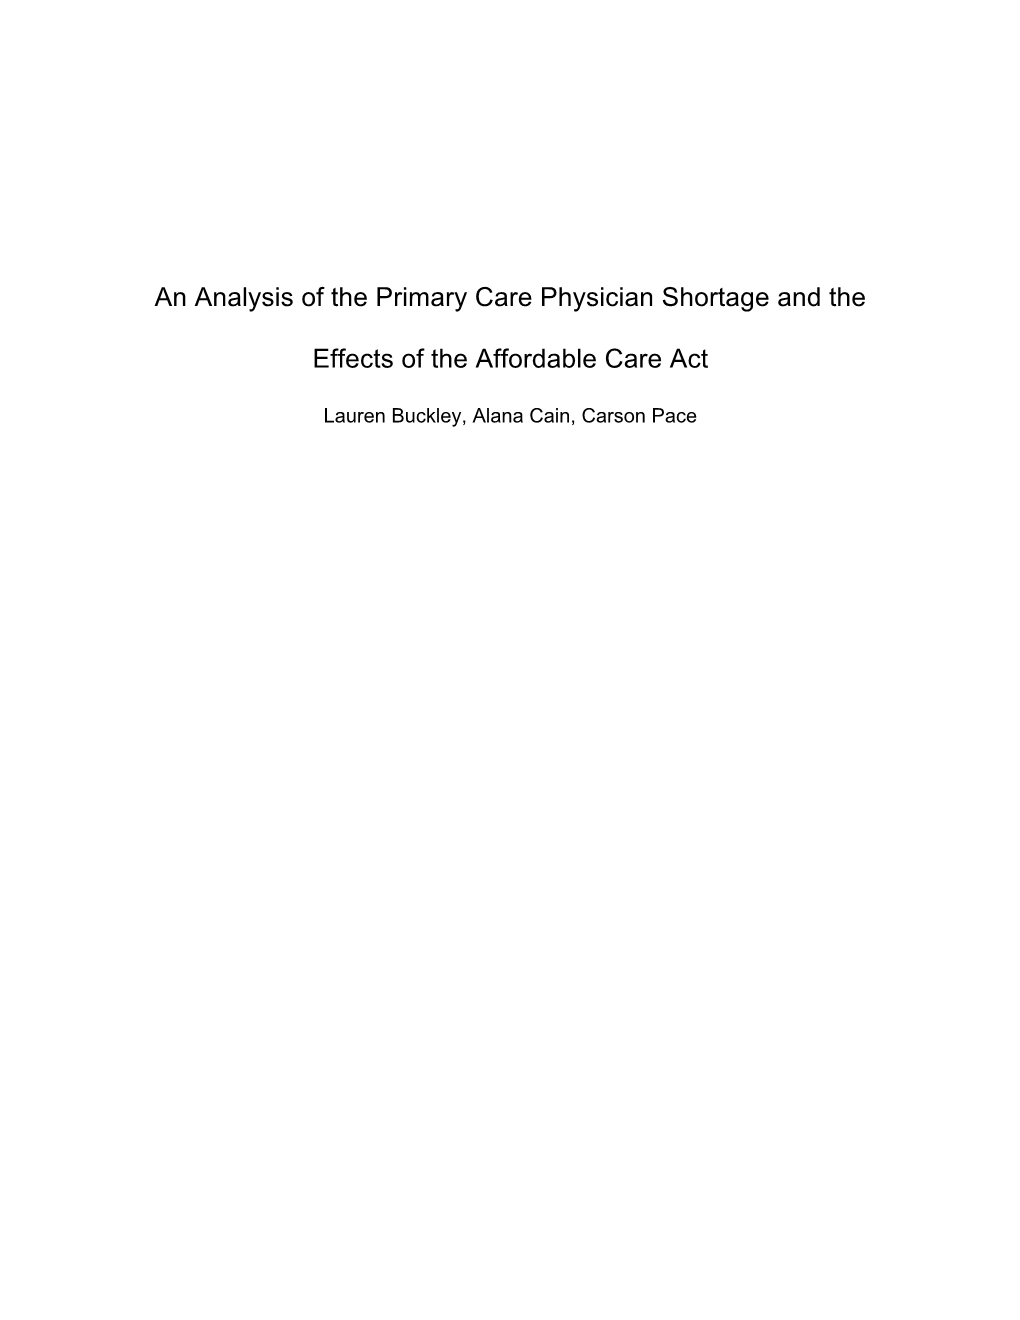 An Analysis of the Primary Care Physician Shortage and the Effects